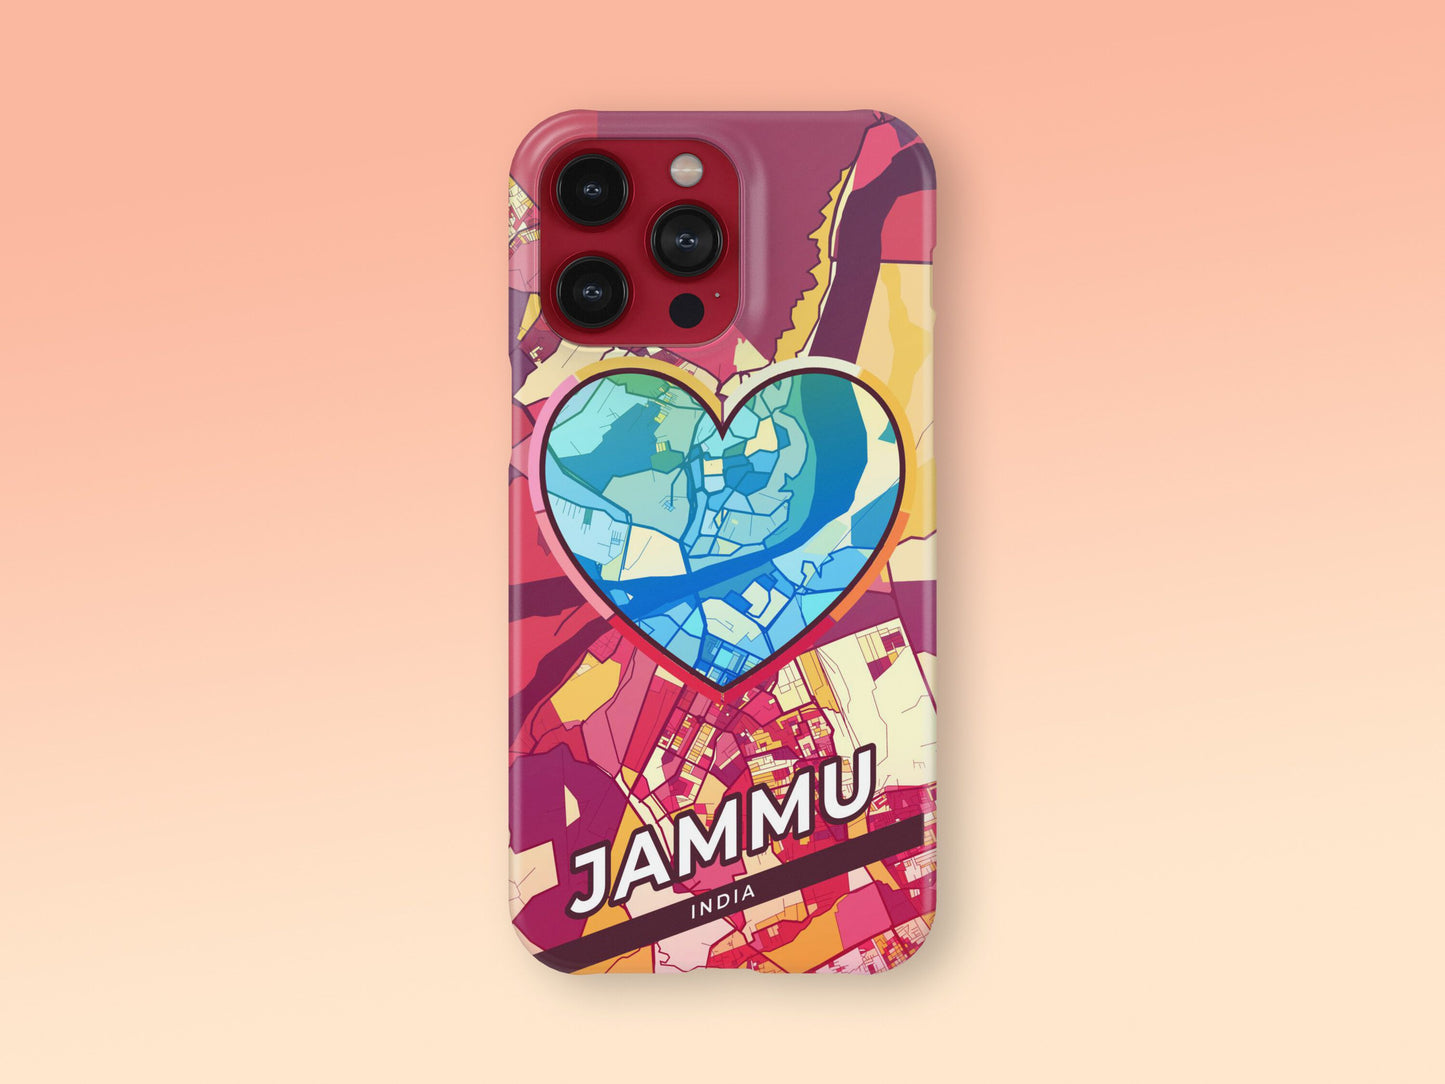 Jammu India slim phone case with colorful icon. Birthday, wedding or housewarming gift. Couple match cases. 2